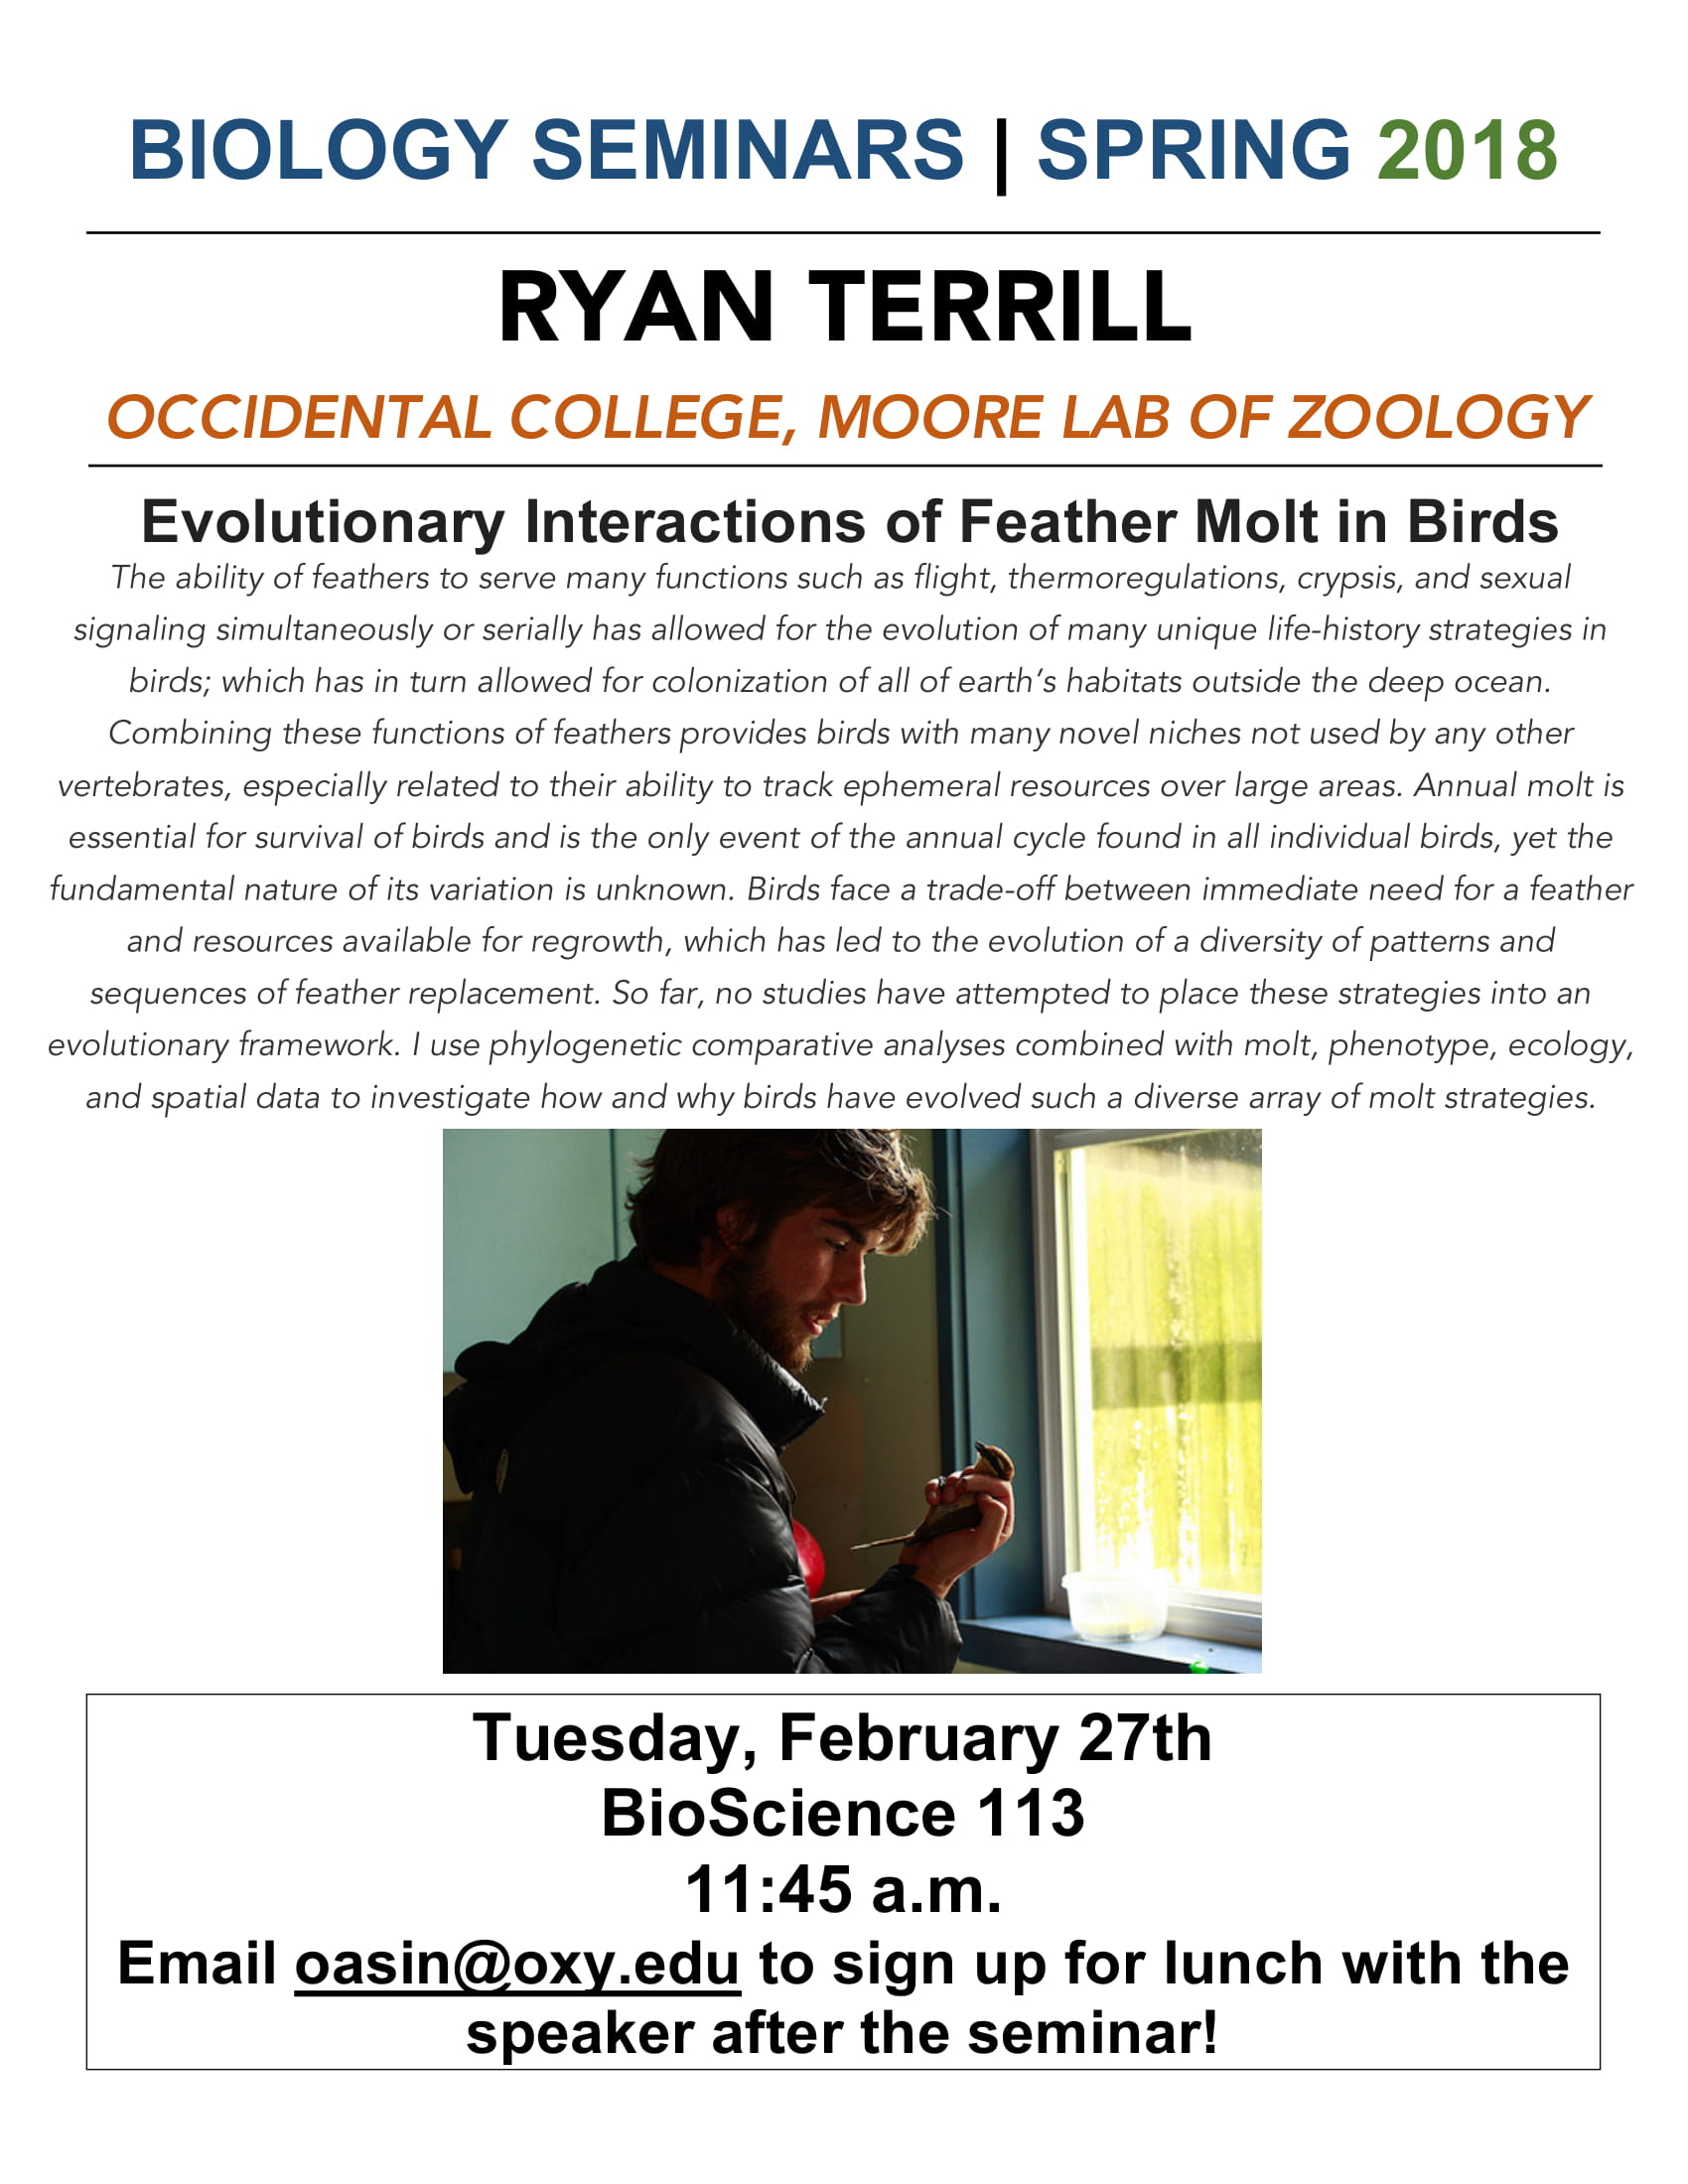 Image for Ryan Terrill: Evolutionary Interactions of Feather